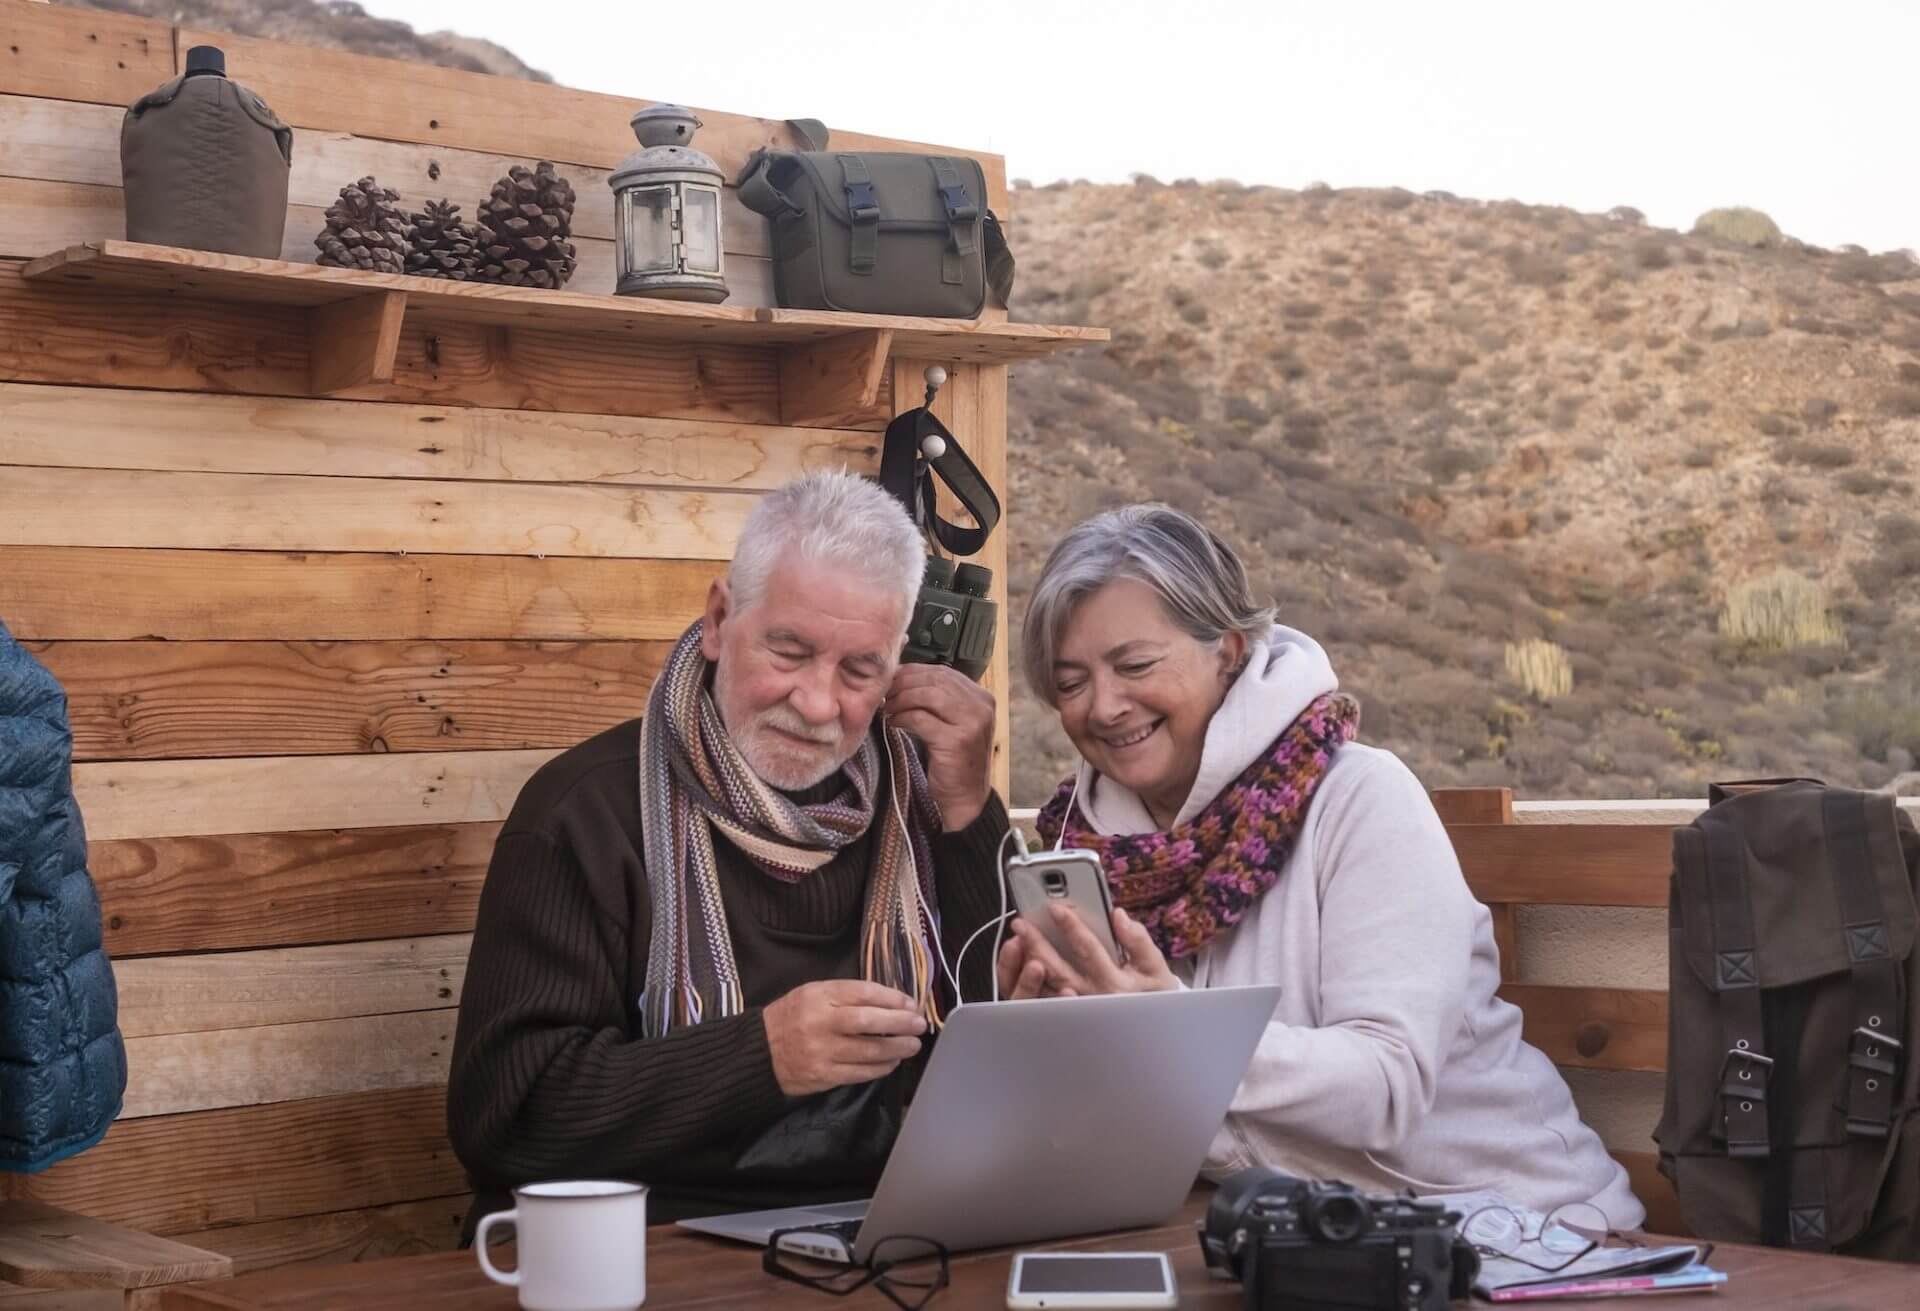 Senior couple pauses at rustic mountain bar before continuing the hike. Nomadic people with laptop